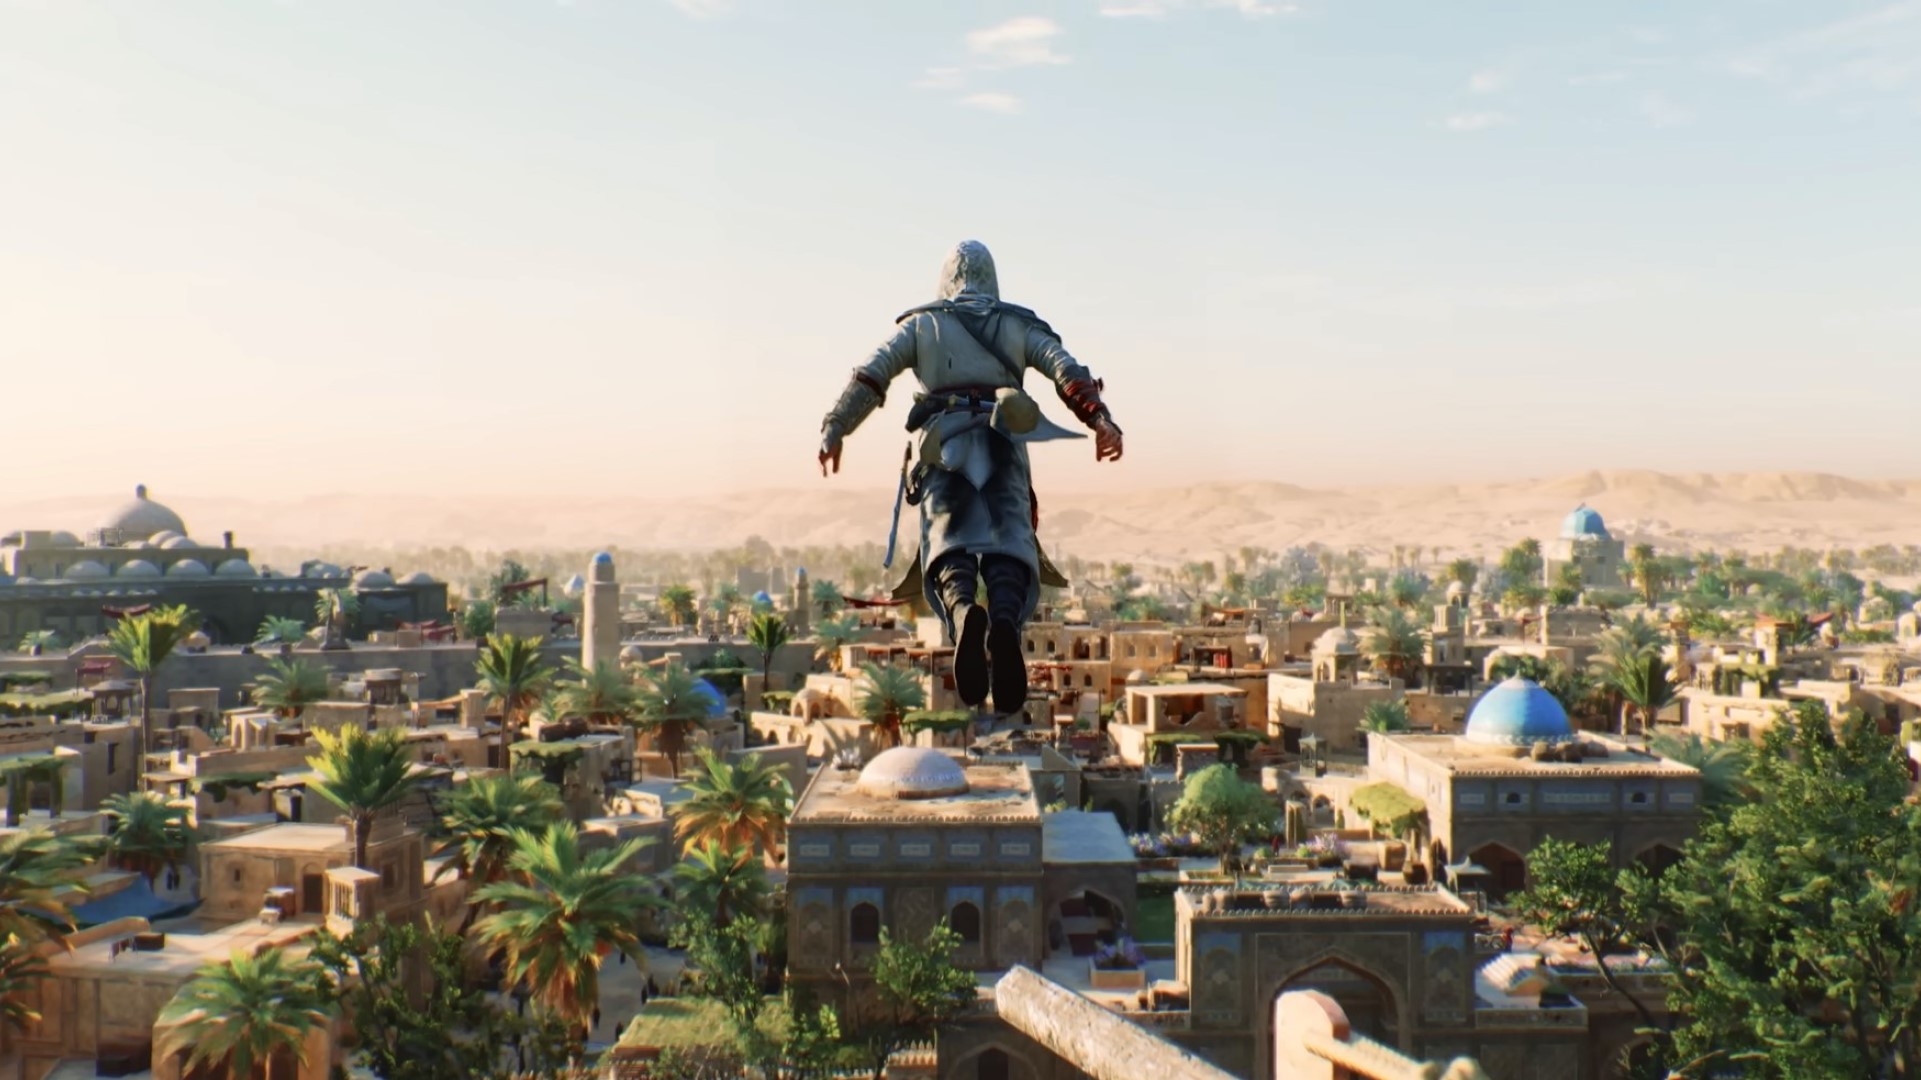 Assassin’s Creed Mirage Video Discusses Returning to the Series’ Roots with Parkour, Stealth, and More